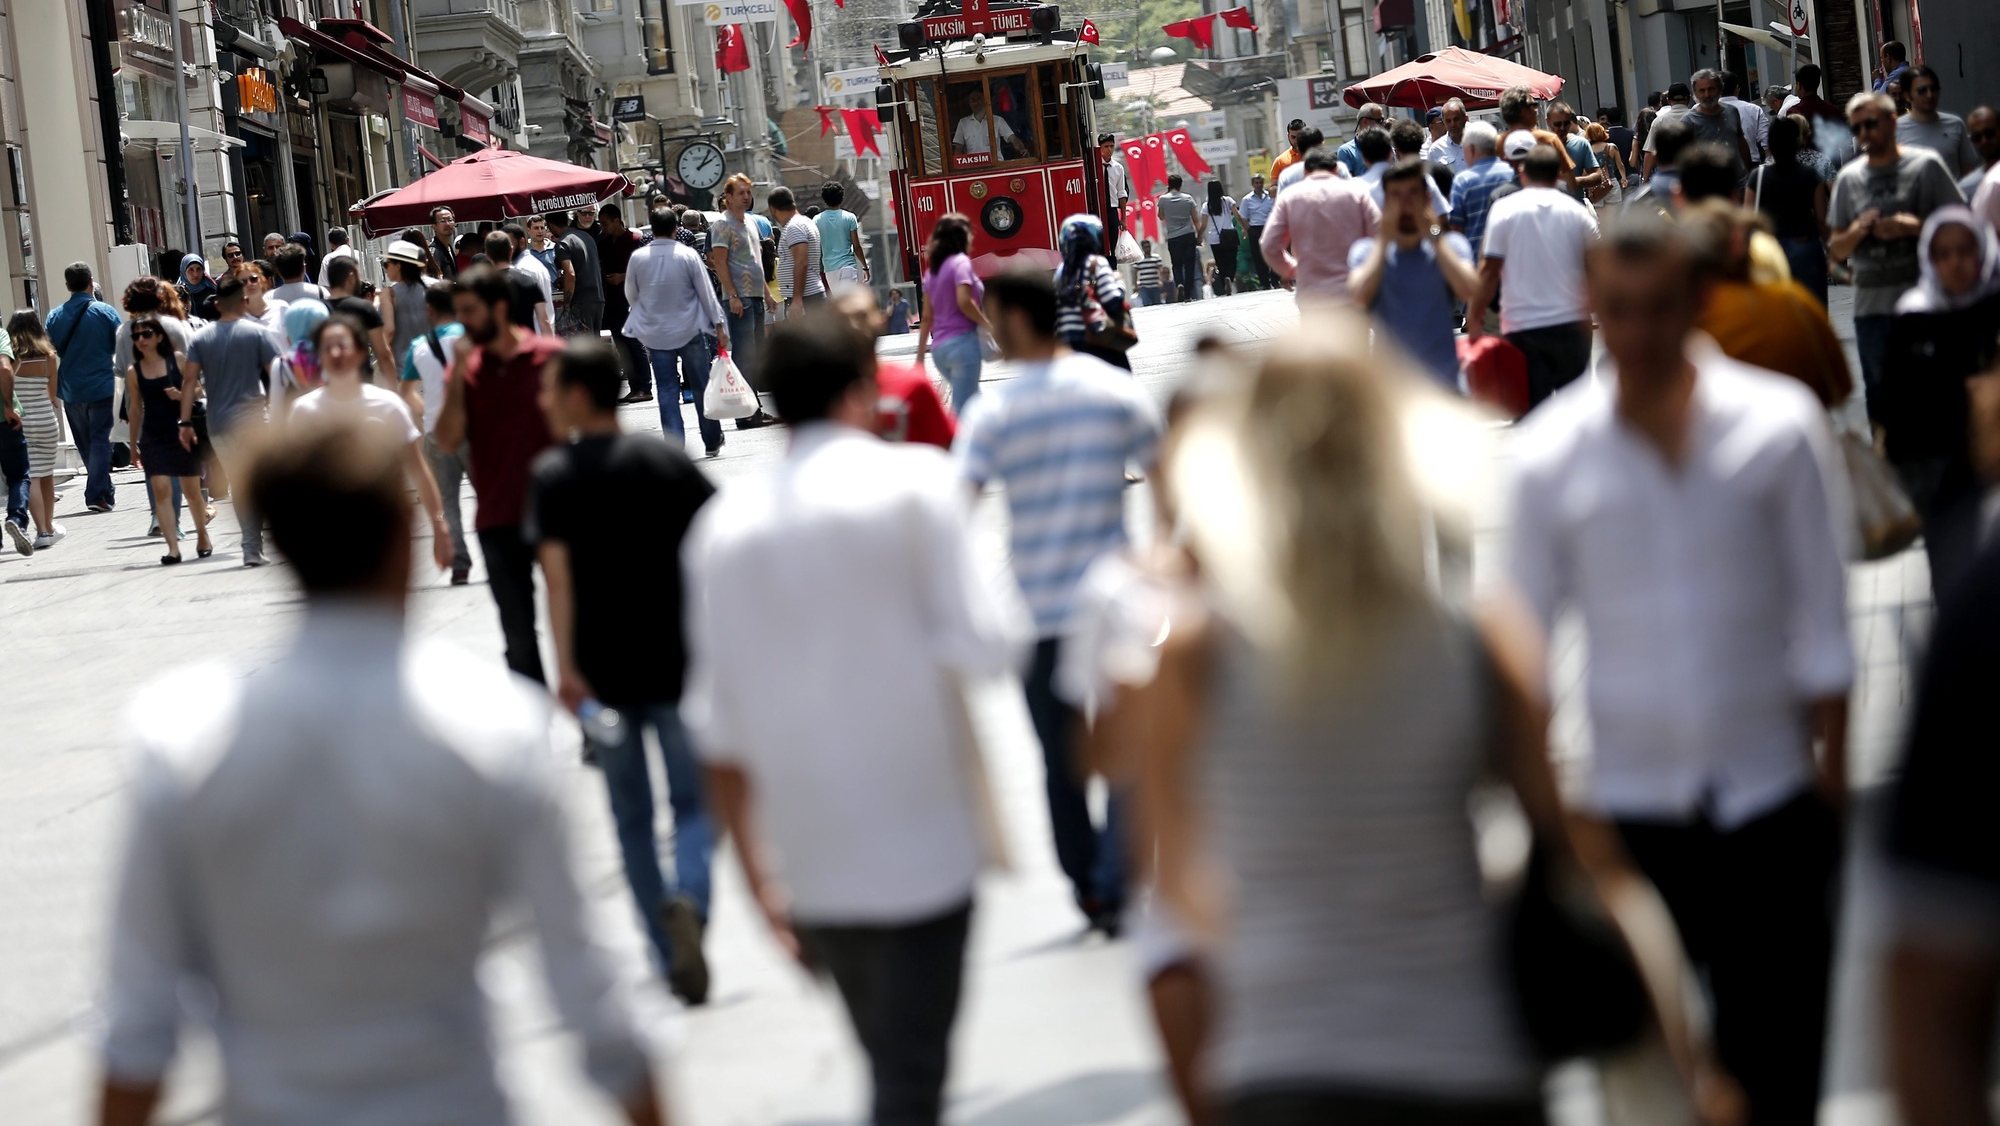 epa05430345 People walk on Istiklal Street near Taksim Square,  in Istanbul, Turkey, 18 July 2016. Turkish Prime Minister Yildirim reportedly said that the Turkish military was involved in an attempted coup d&#039;etat. Turkish President Recep Tayyip Erdogan has denounced the coup attempt as an &#039;act of treason&#039; and insisted his government remains in charge. Some 104 coup plotters were killed, 90 people - 41 of them police and 47 are civilians - &#039;fell martrys&#039;, after an attempt to bring down the Turkish government, the acting army chief General Umit Dundar said in a televised appearance.who were killed in a coup attempt on 16 July, during the funeral, in Istanbul, Turkey, 17 July 2016. Turkish Prime Minister Yildirim reportedly said that the Turkish military was involved in an attempted coup d&#039;etat. Turkish President Recep Tayyip Erdogan has denounced the coup attempt as an &#039;act of treason&#039; and insisted his government remains in charge. Some 104 coup plotters were killed, 90 people - 41 of them police and 47 are civilians - &#039;fell martrys&#039;, after an attempt to bring down the Turkish government, the acting army chief General Umit Dundar said in a televised appearance.  EPA/SEDAT SUNA